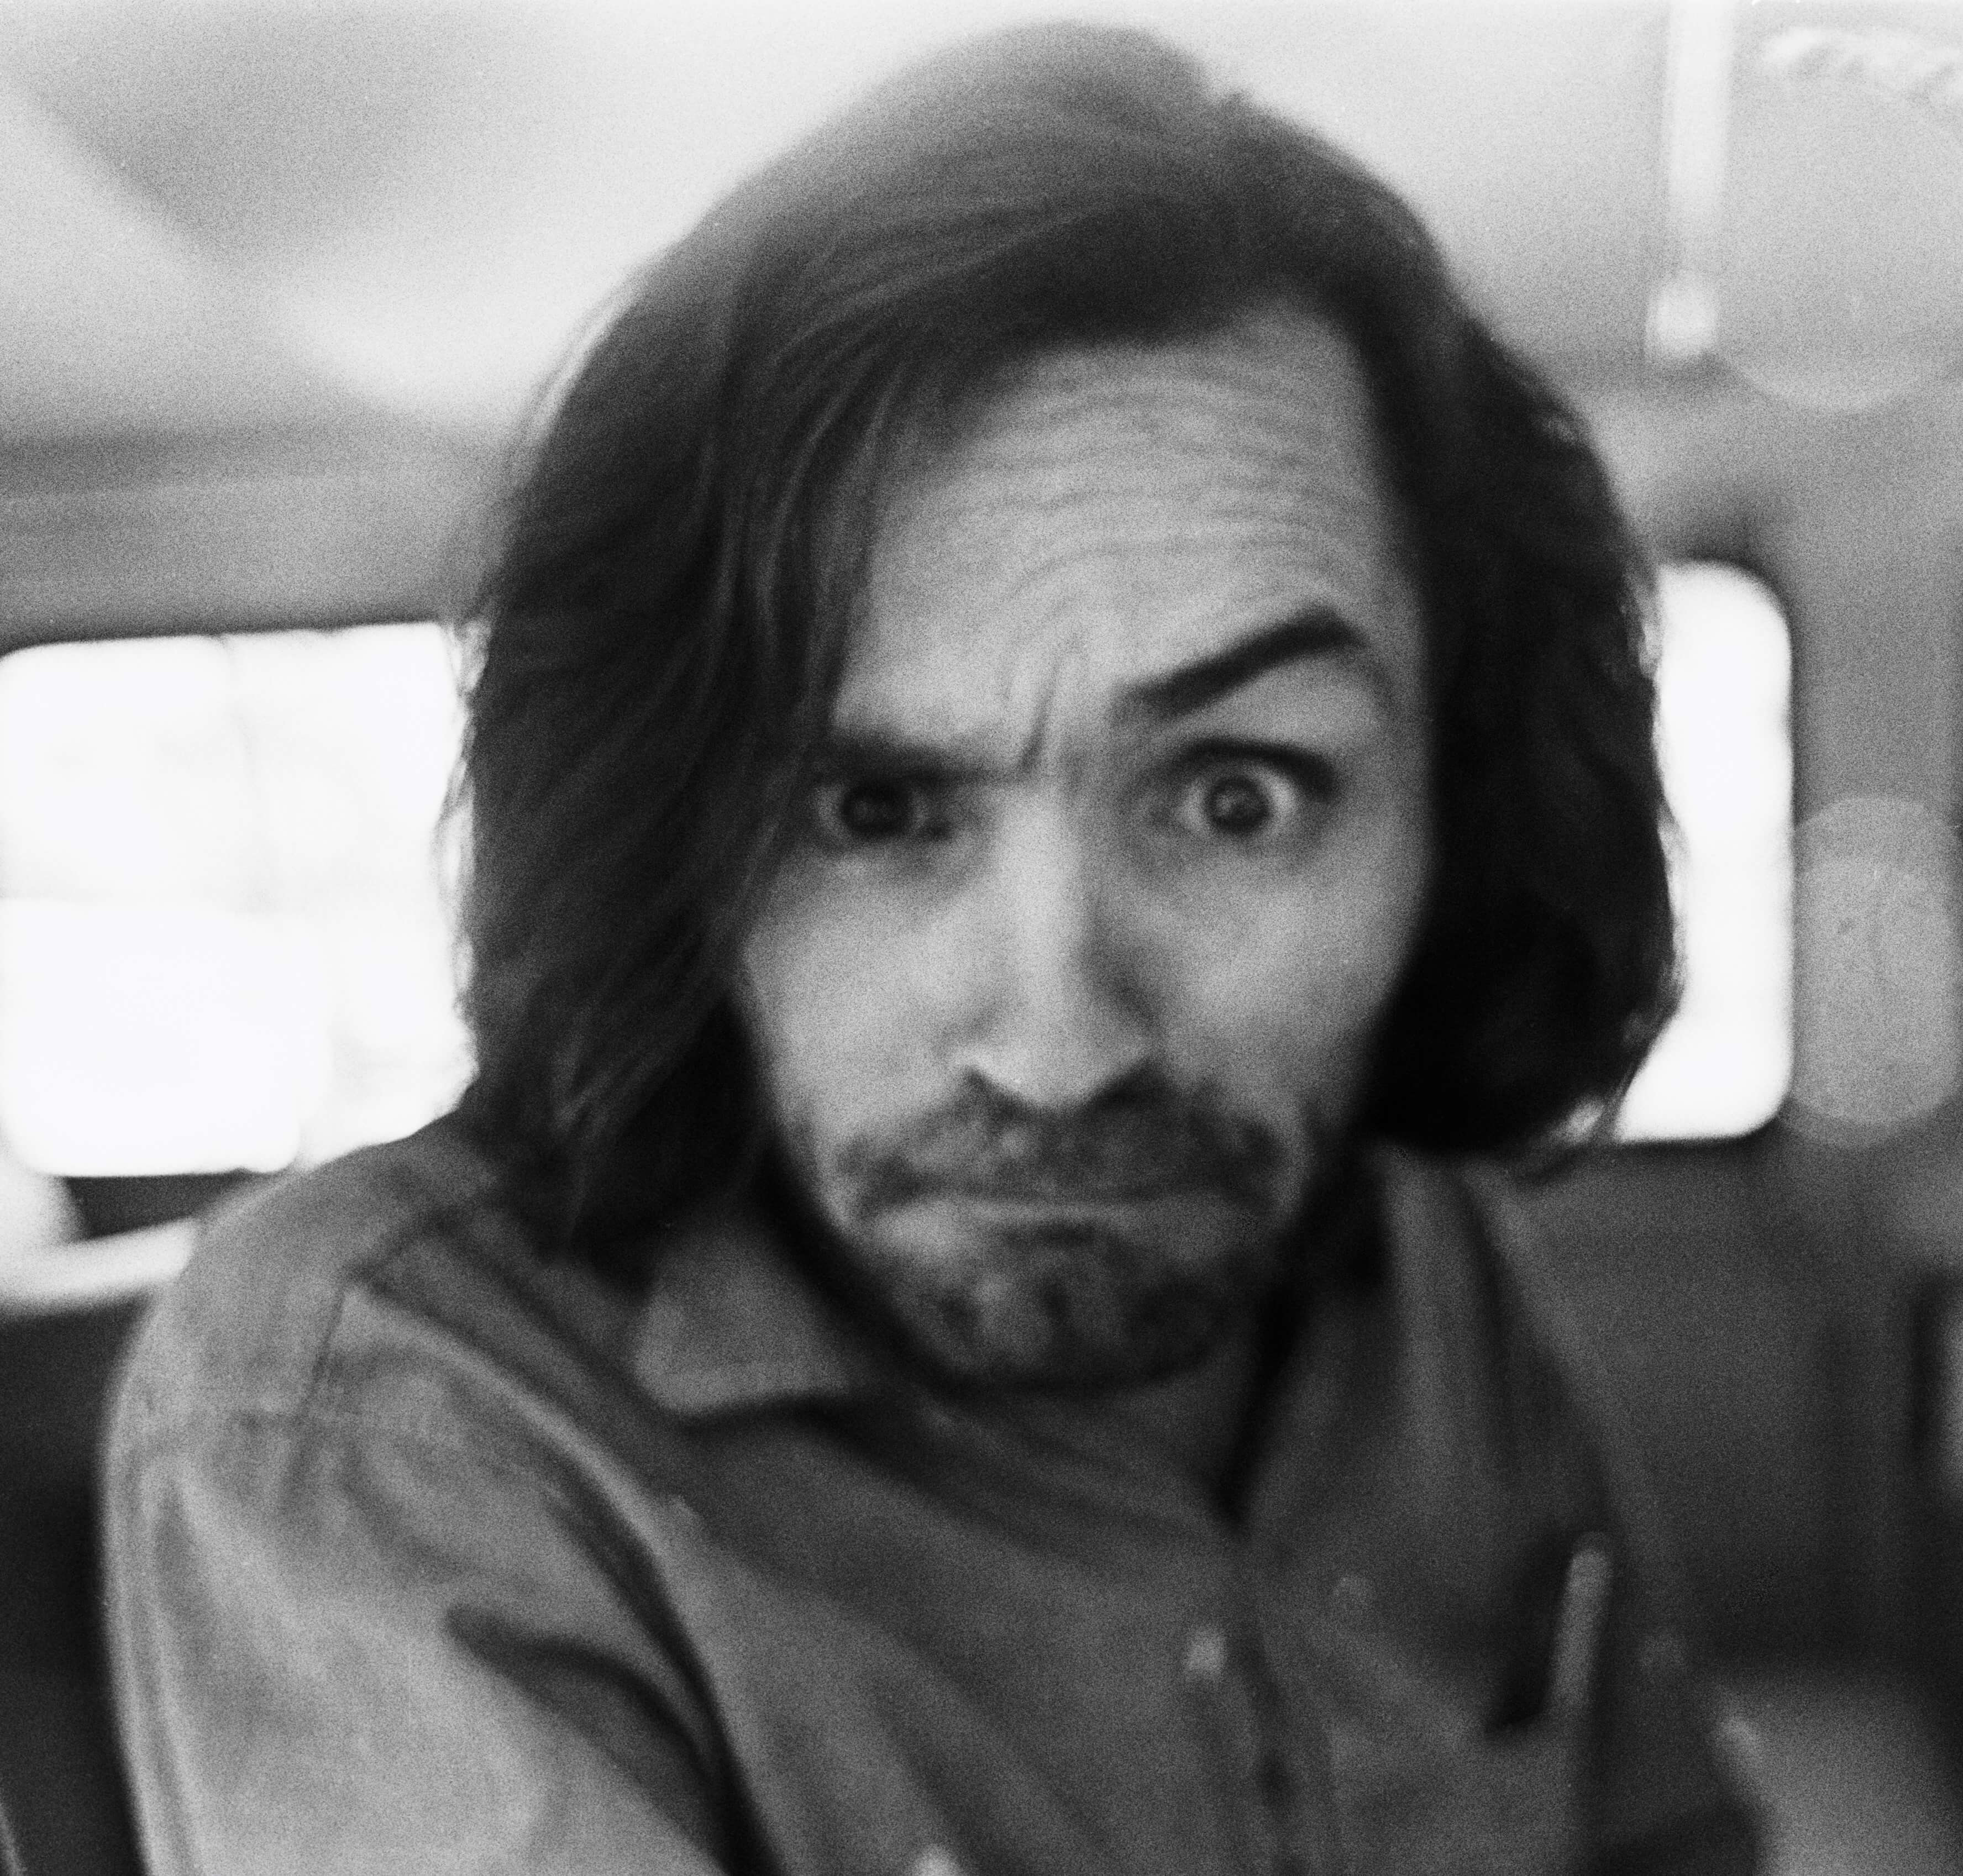 Charles Manson, a criminal inspired by The Beatles' 'The White Album,' in black-and-white